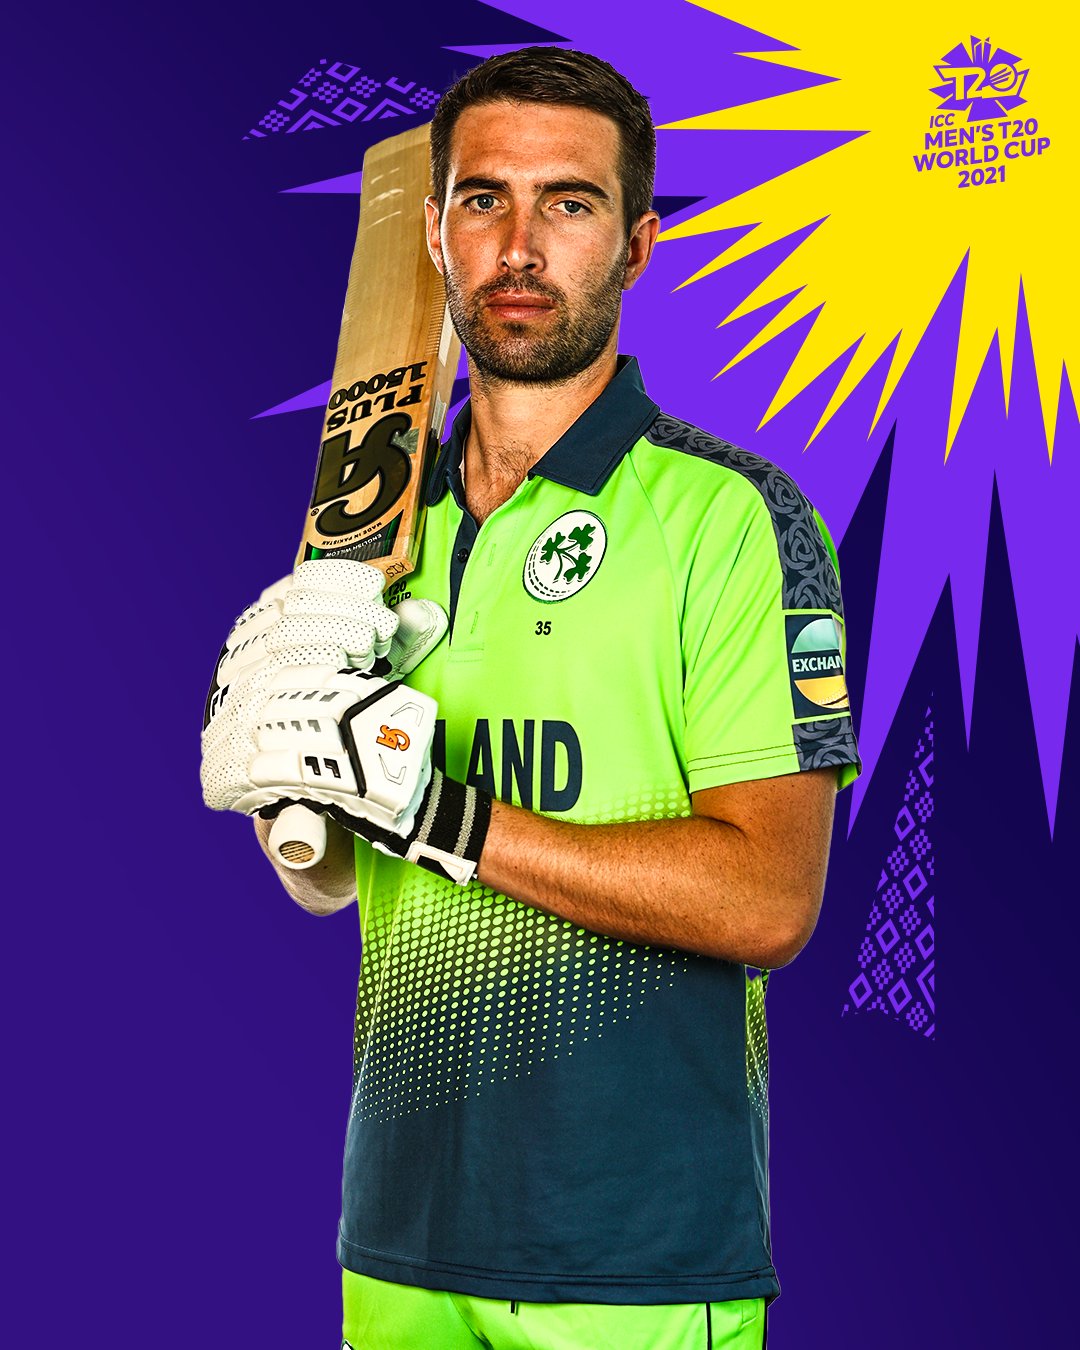 IRELAND CRICKETER MENS T-SHIRT TEE TOP GIFTCRICKET WORLD CUP